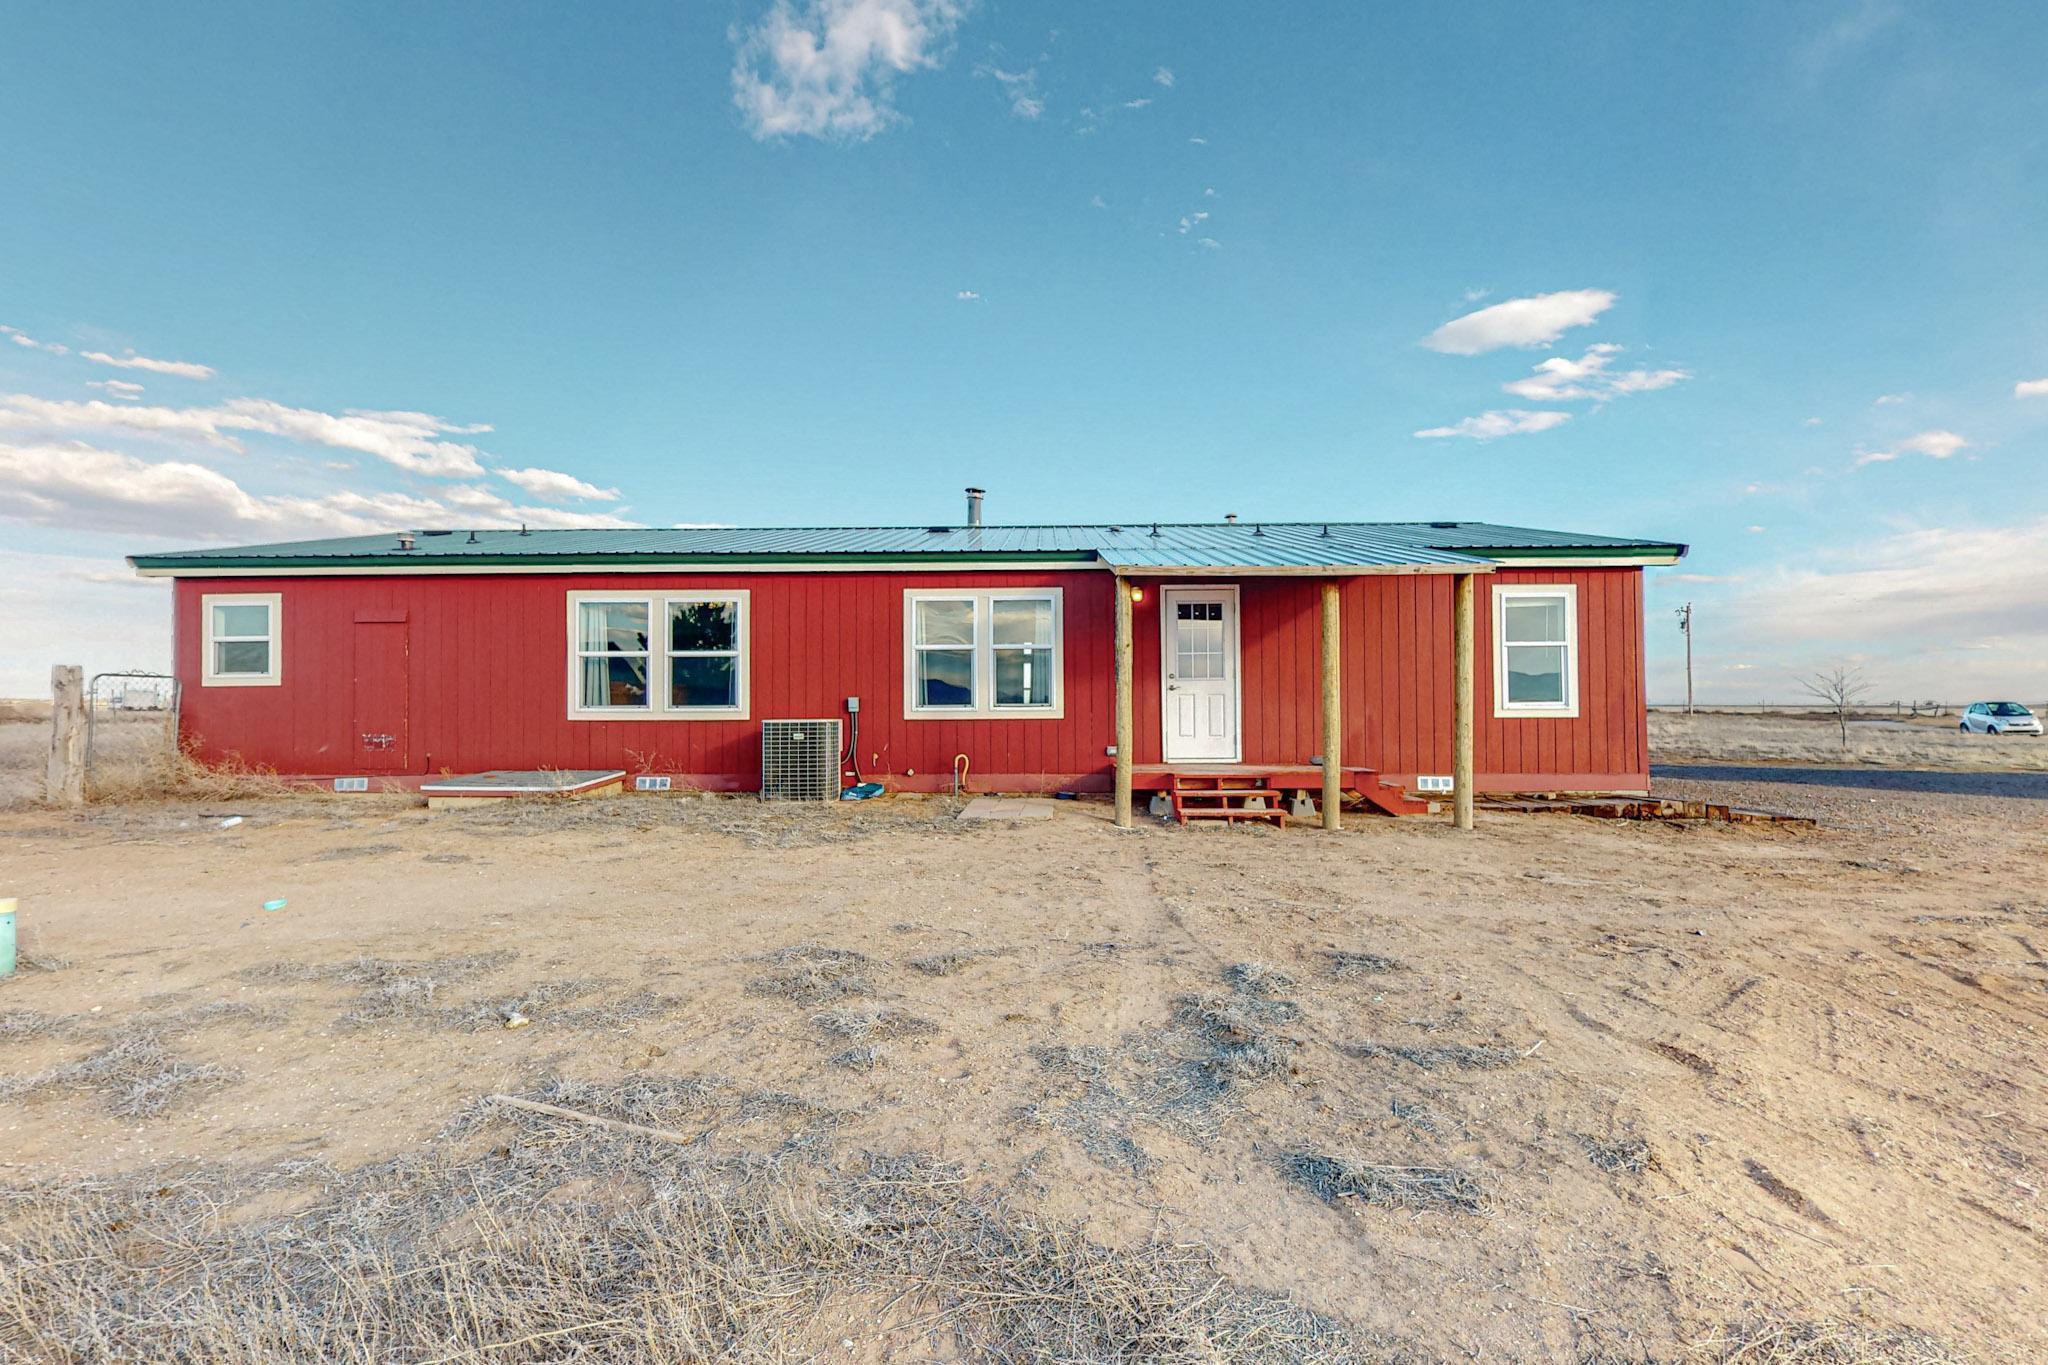 39 Feed Lot Road, Stanley, New Mexico 87056, 3 Bedrooms Bedrooms, ,2 BathroomsBathrooms,Residential,For Sale,39 Feed Lot Road,1059425